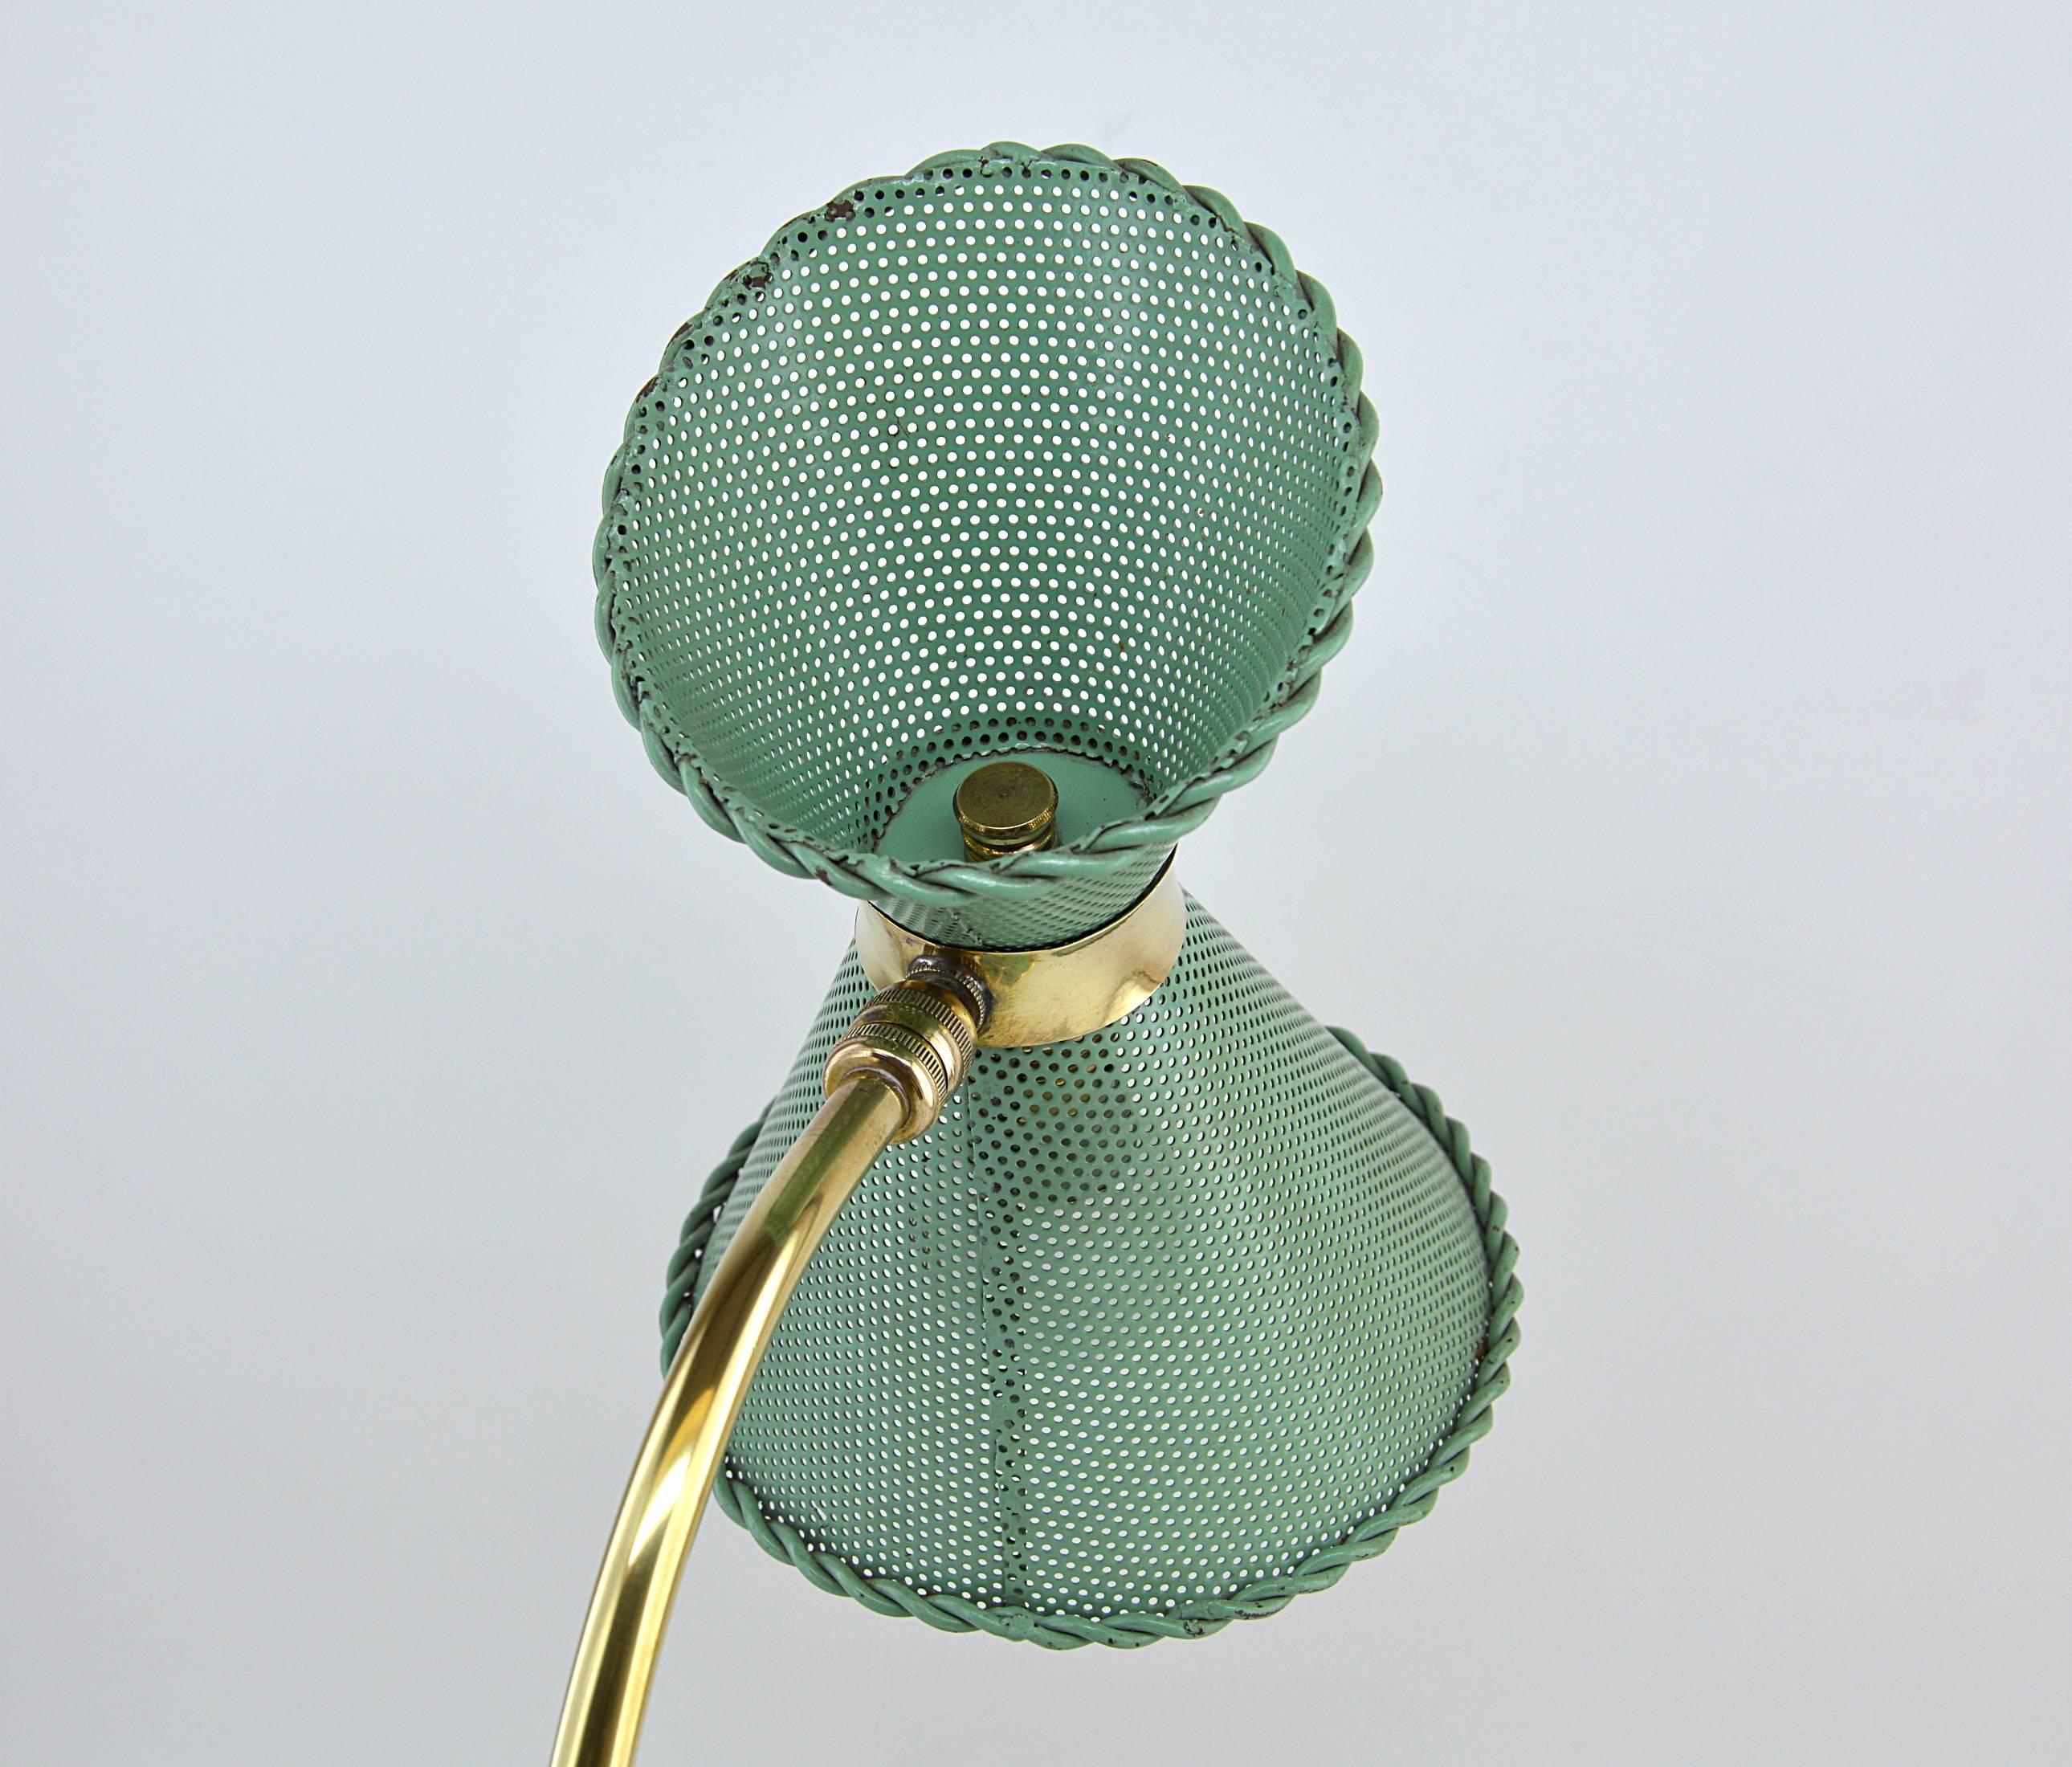 Mid-20th Century French Vintage Desk or Table Lamp in the Manner of Mathieu Matégot, 1950s